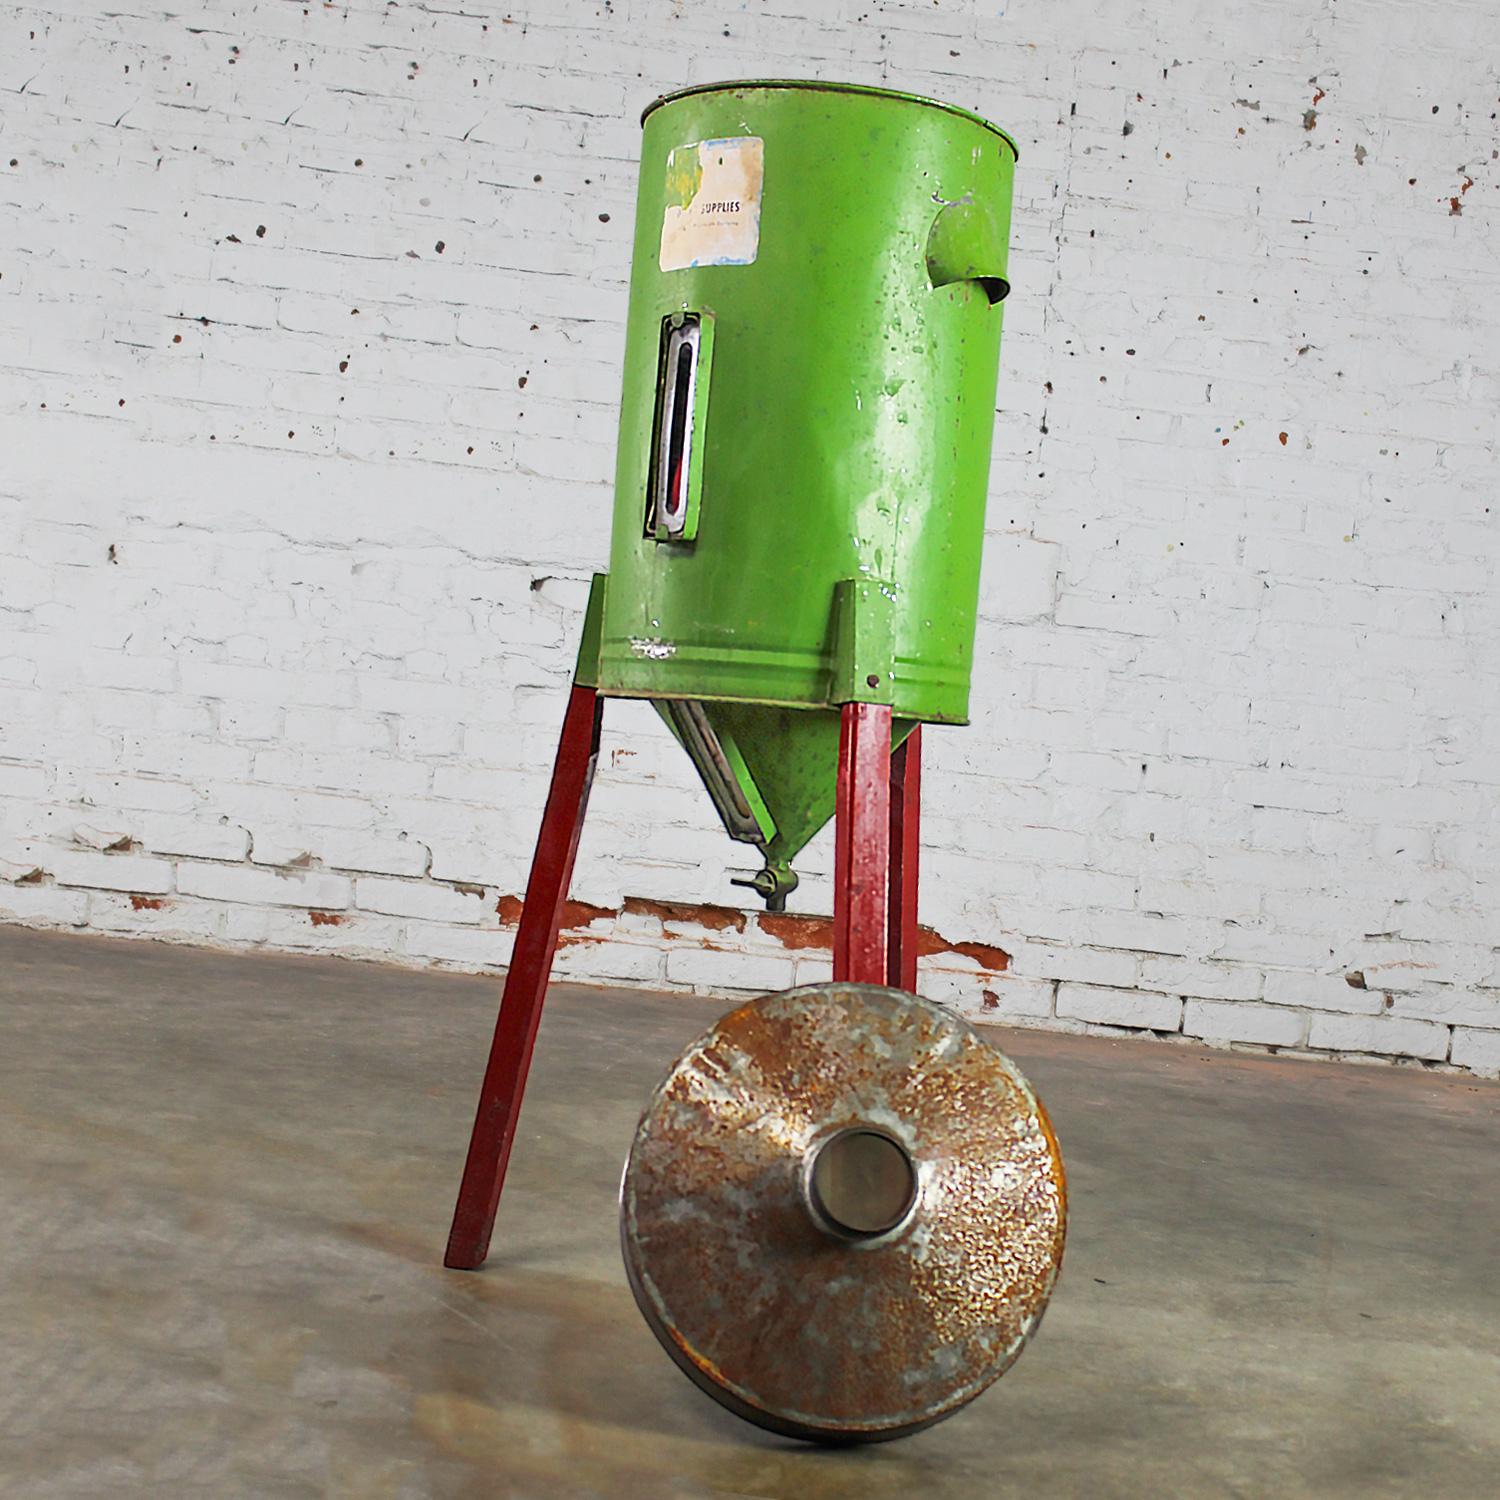 Early - Mid-20th Century Rustic Gravity Cream Separator Green Metal Can Red Legs For Sale 1